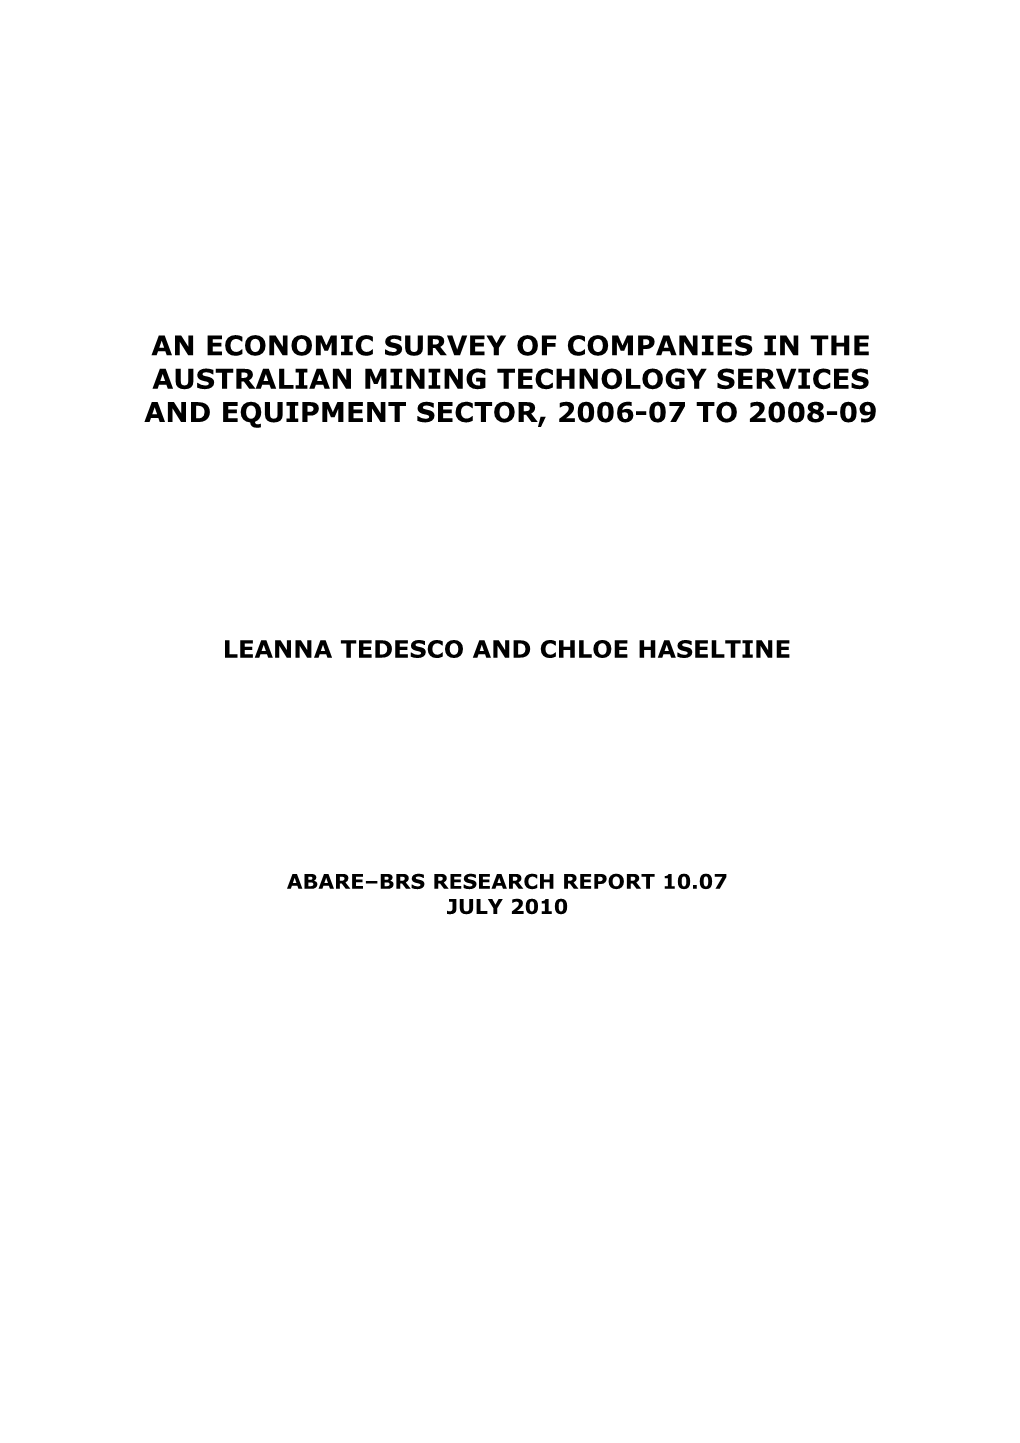 An Economic Survey of Companies in the Australian Mining Technology Services and Equipment